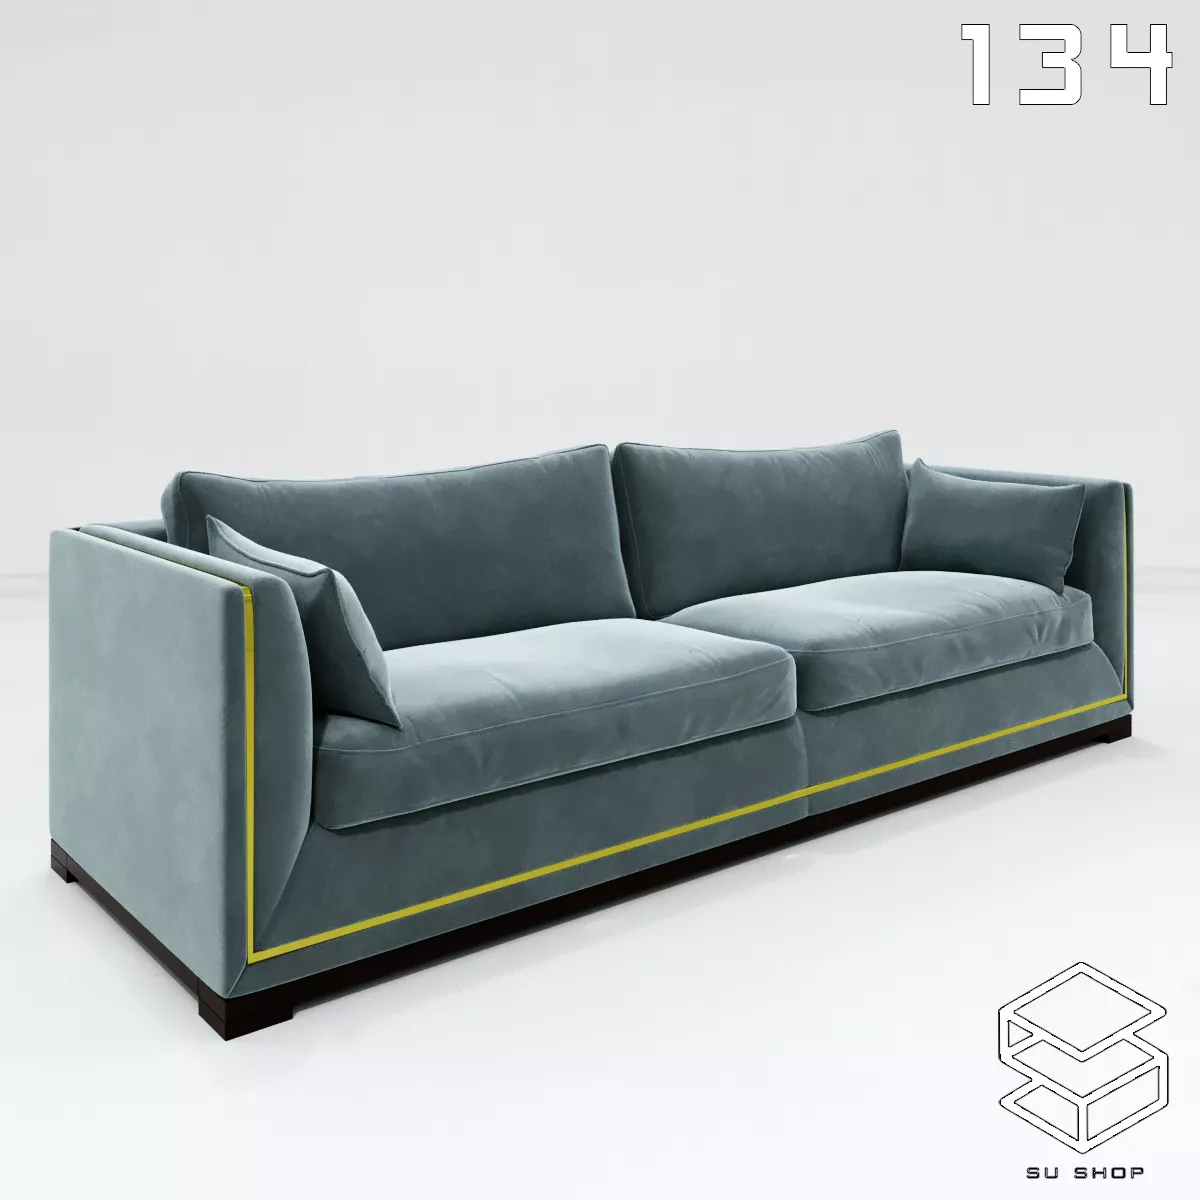 MODERN SOFA - SKETCHUP 3D MODEL - VRAY OR ENSCAPE - ID13428